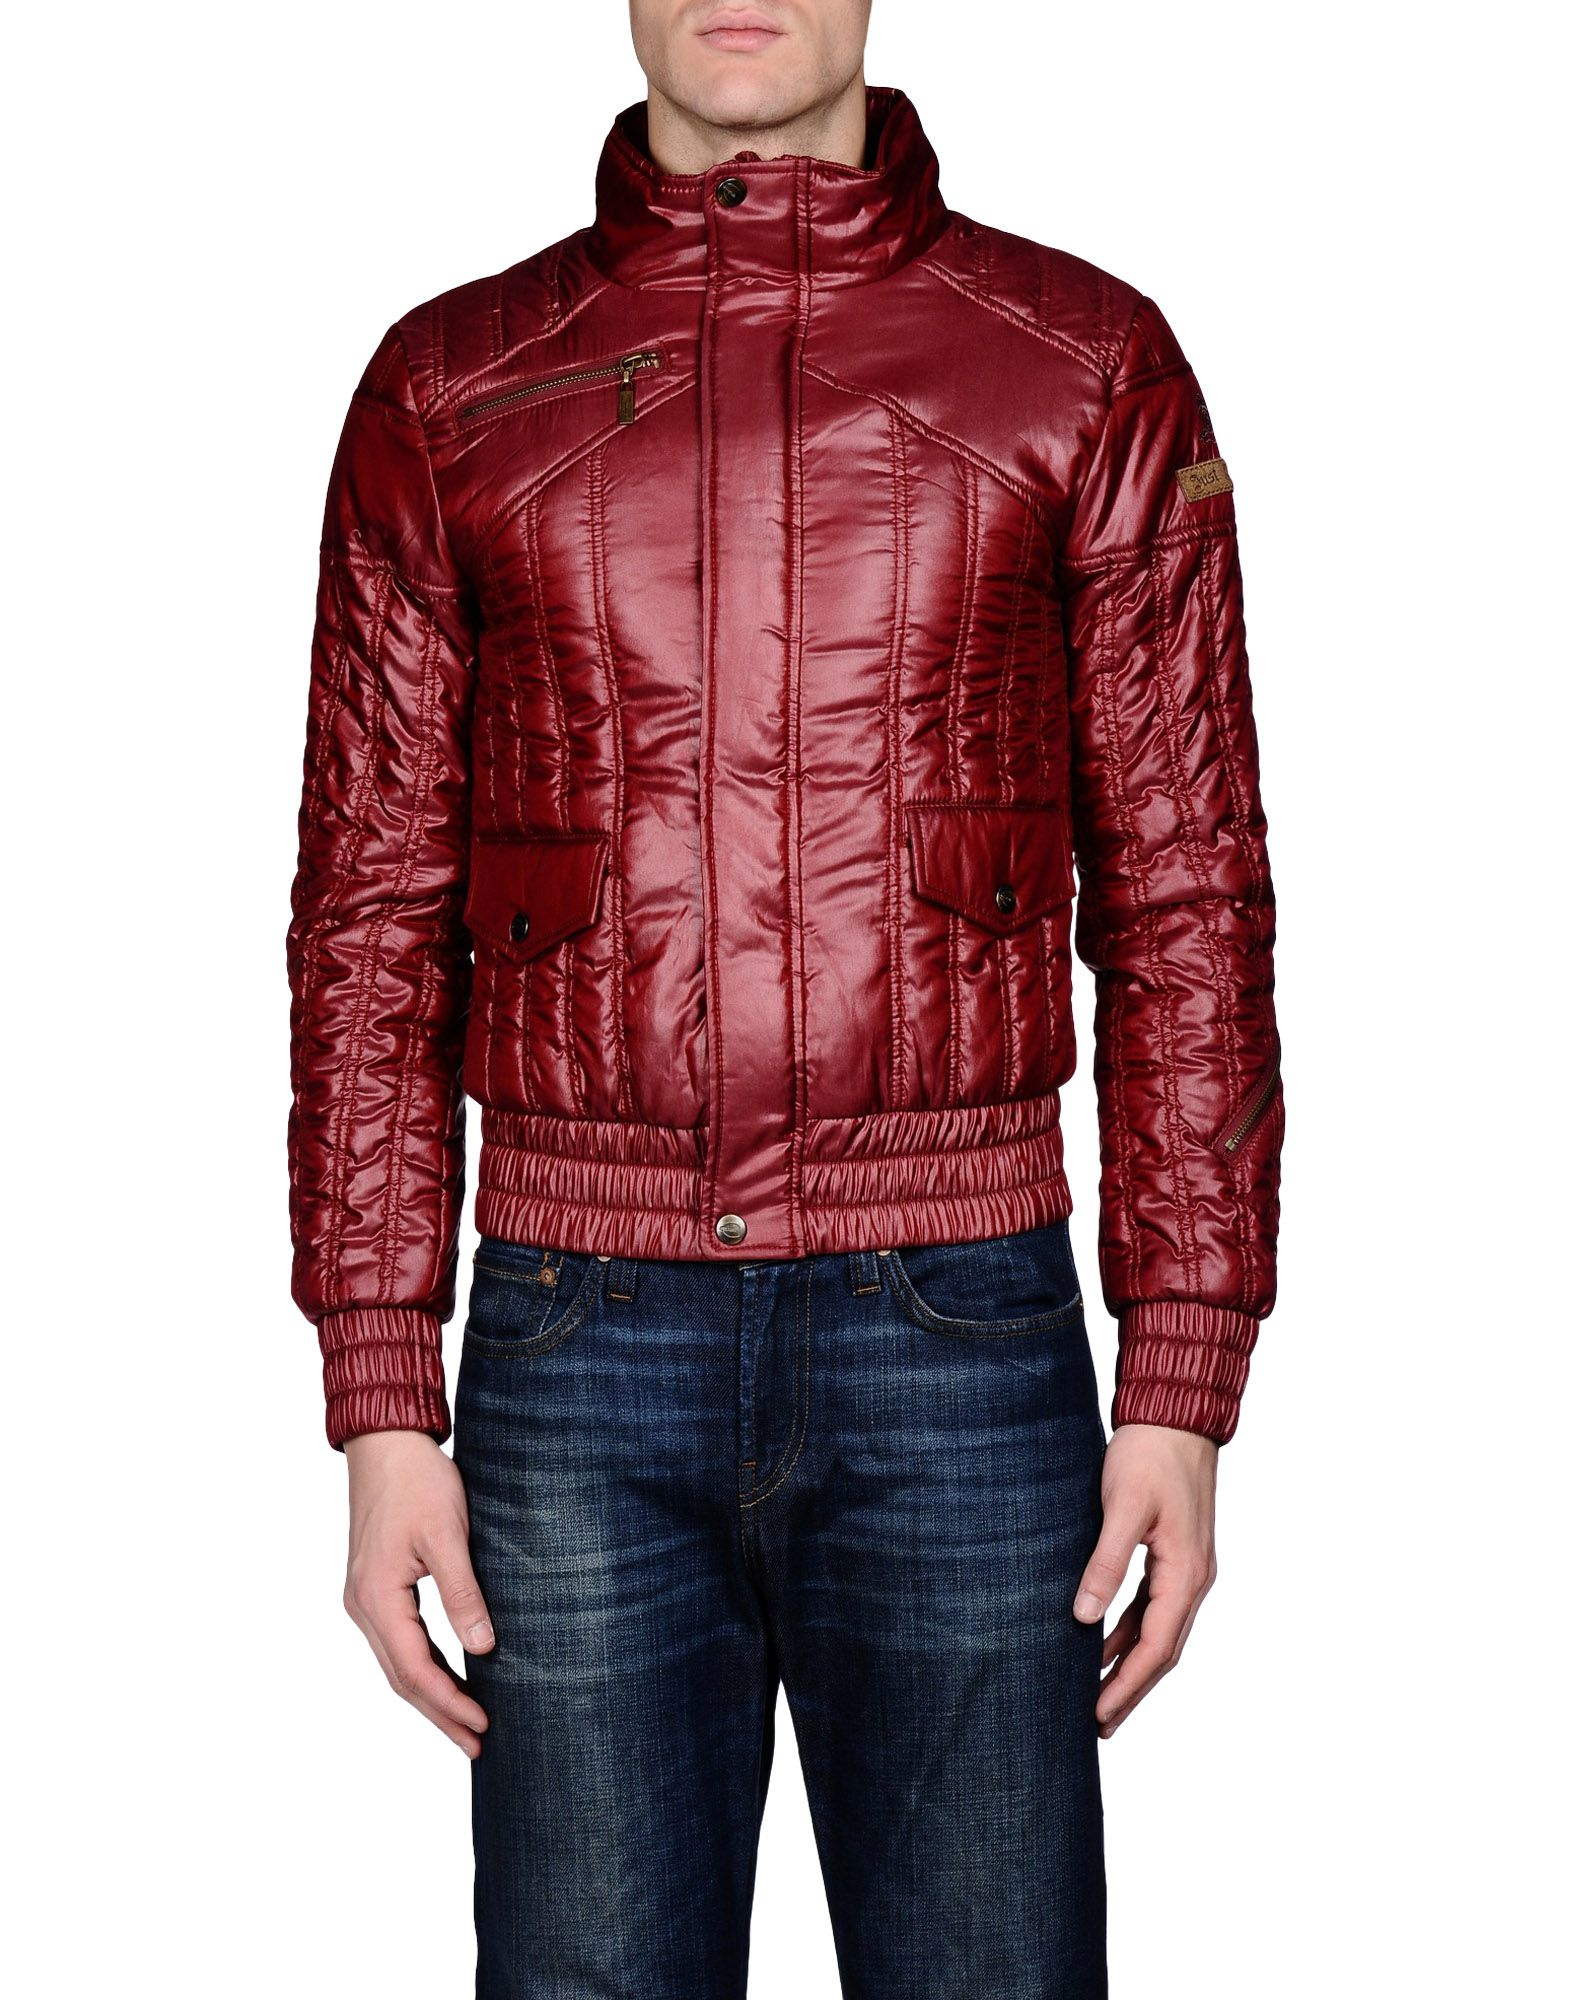 Lyst - Just cavalli Jacket in Red for Men